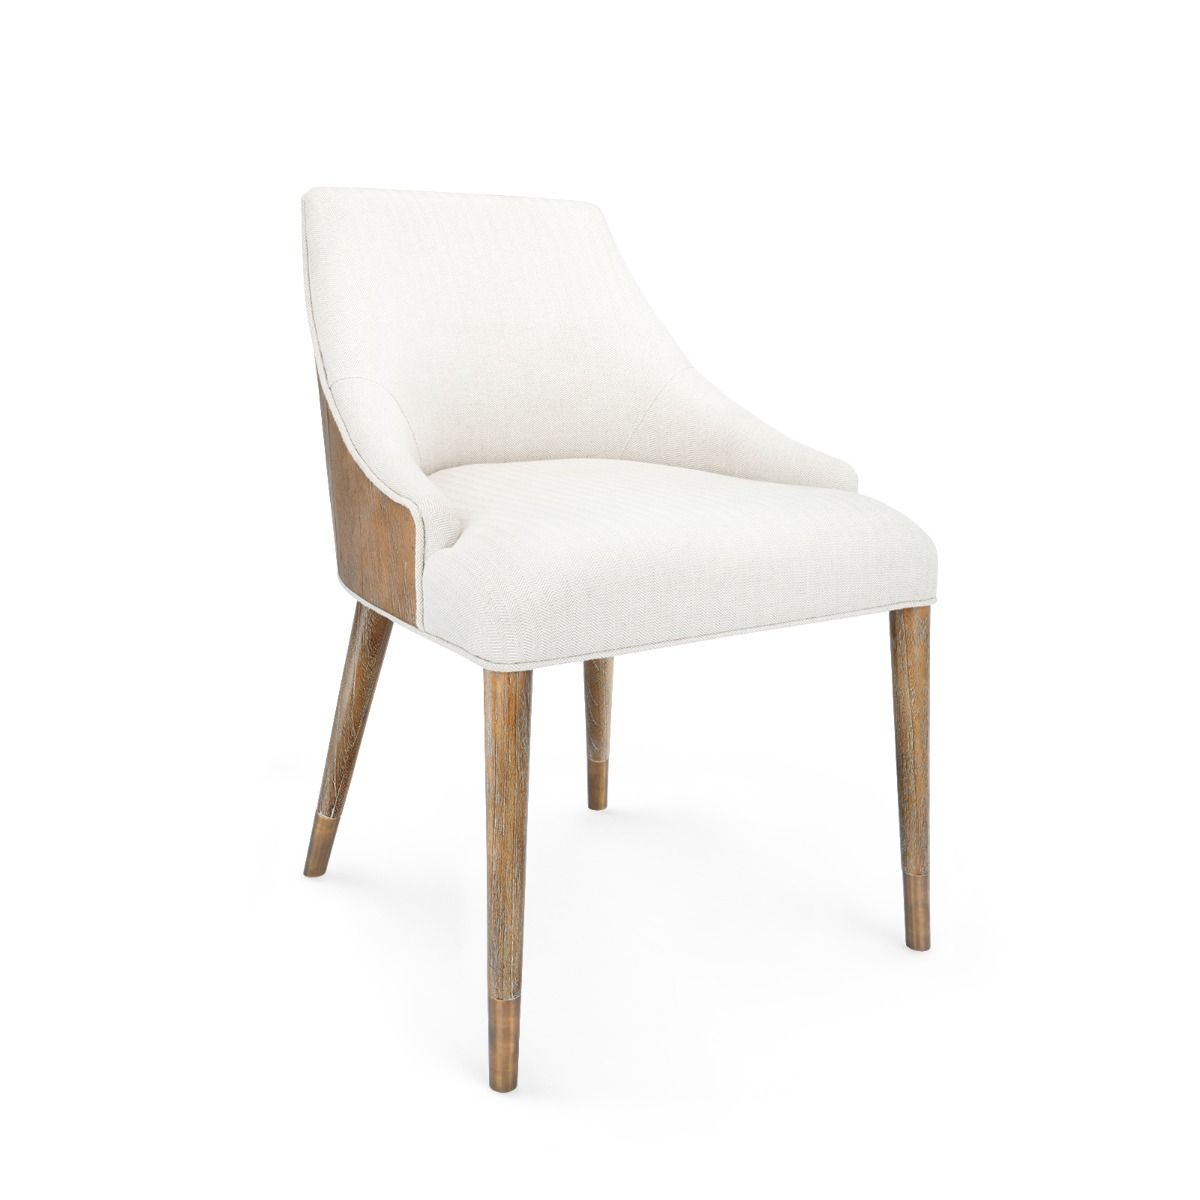 Orion Armchair, Driftwood Dining Chair Bungalow 5     Four Hands, Burke Decor, Mid Century Modern Furniture, Old Bones Furniture Company, Old Bones Co, Modern Mid Century, Designer Furniture, https://www.oldbonesco.com/